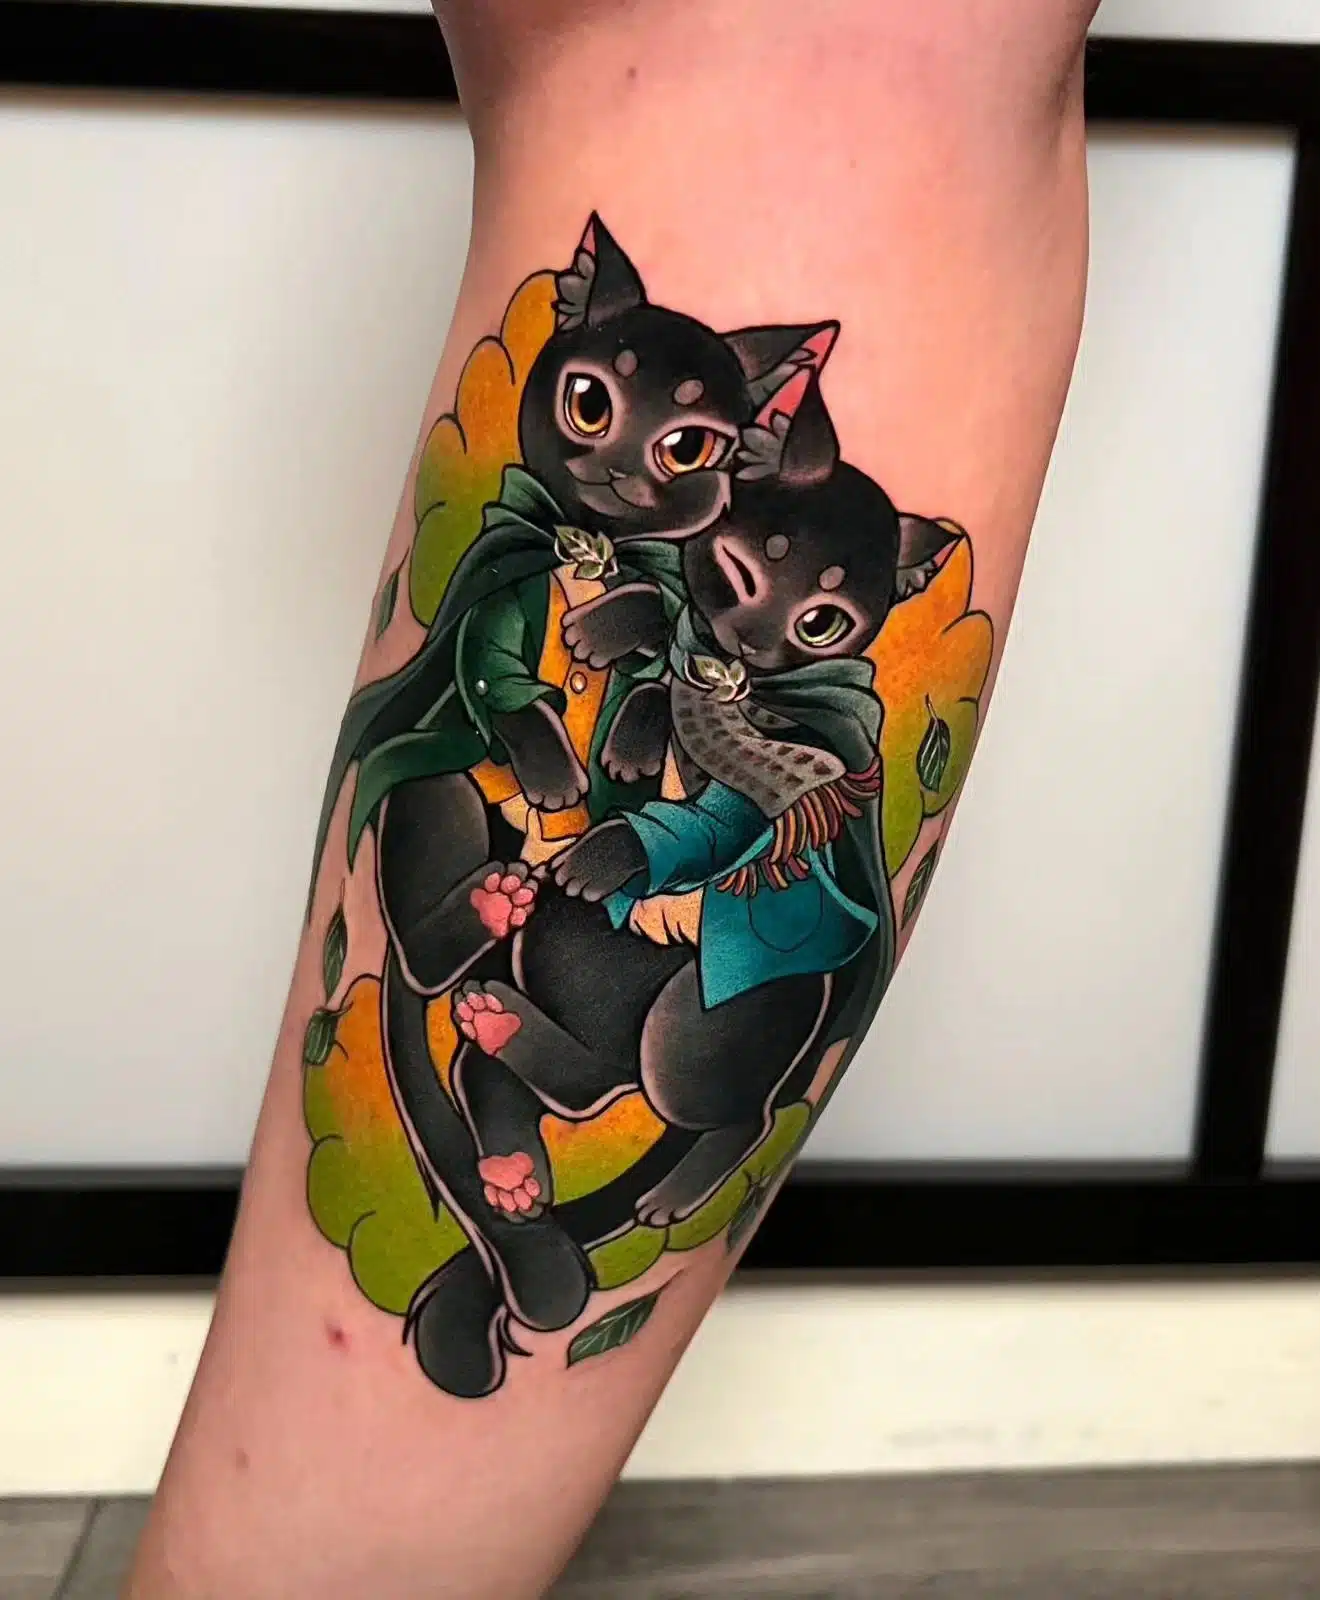 V recently came to get their cats Merry and Pippin immortalised by Nat. They look so cute tattooed as their namesakes, beautiful work!
naaat.j 

Supplies from our sponsors:
magnumtattoosupplies.uk

yayofamilia 
 

Done using:
dankubin

eternalink

              
totaltattoo 